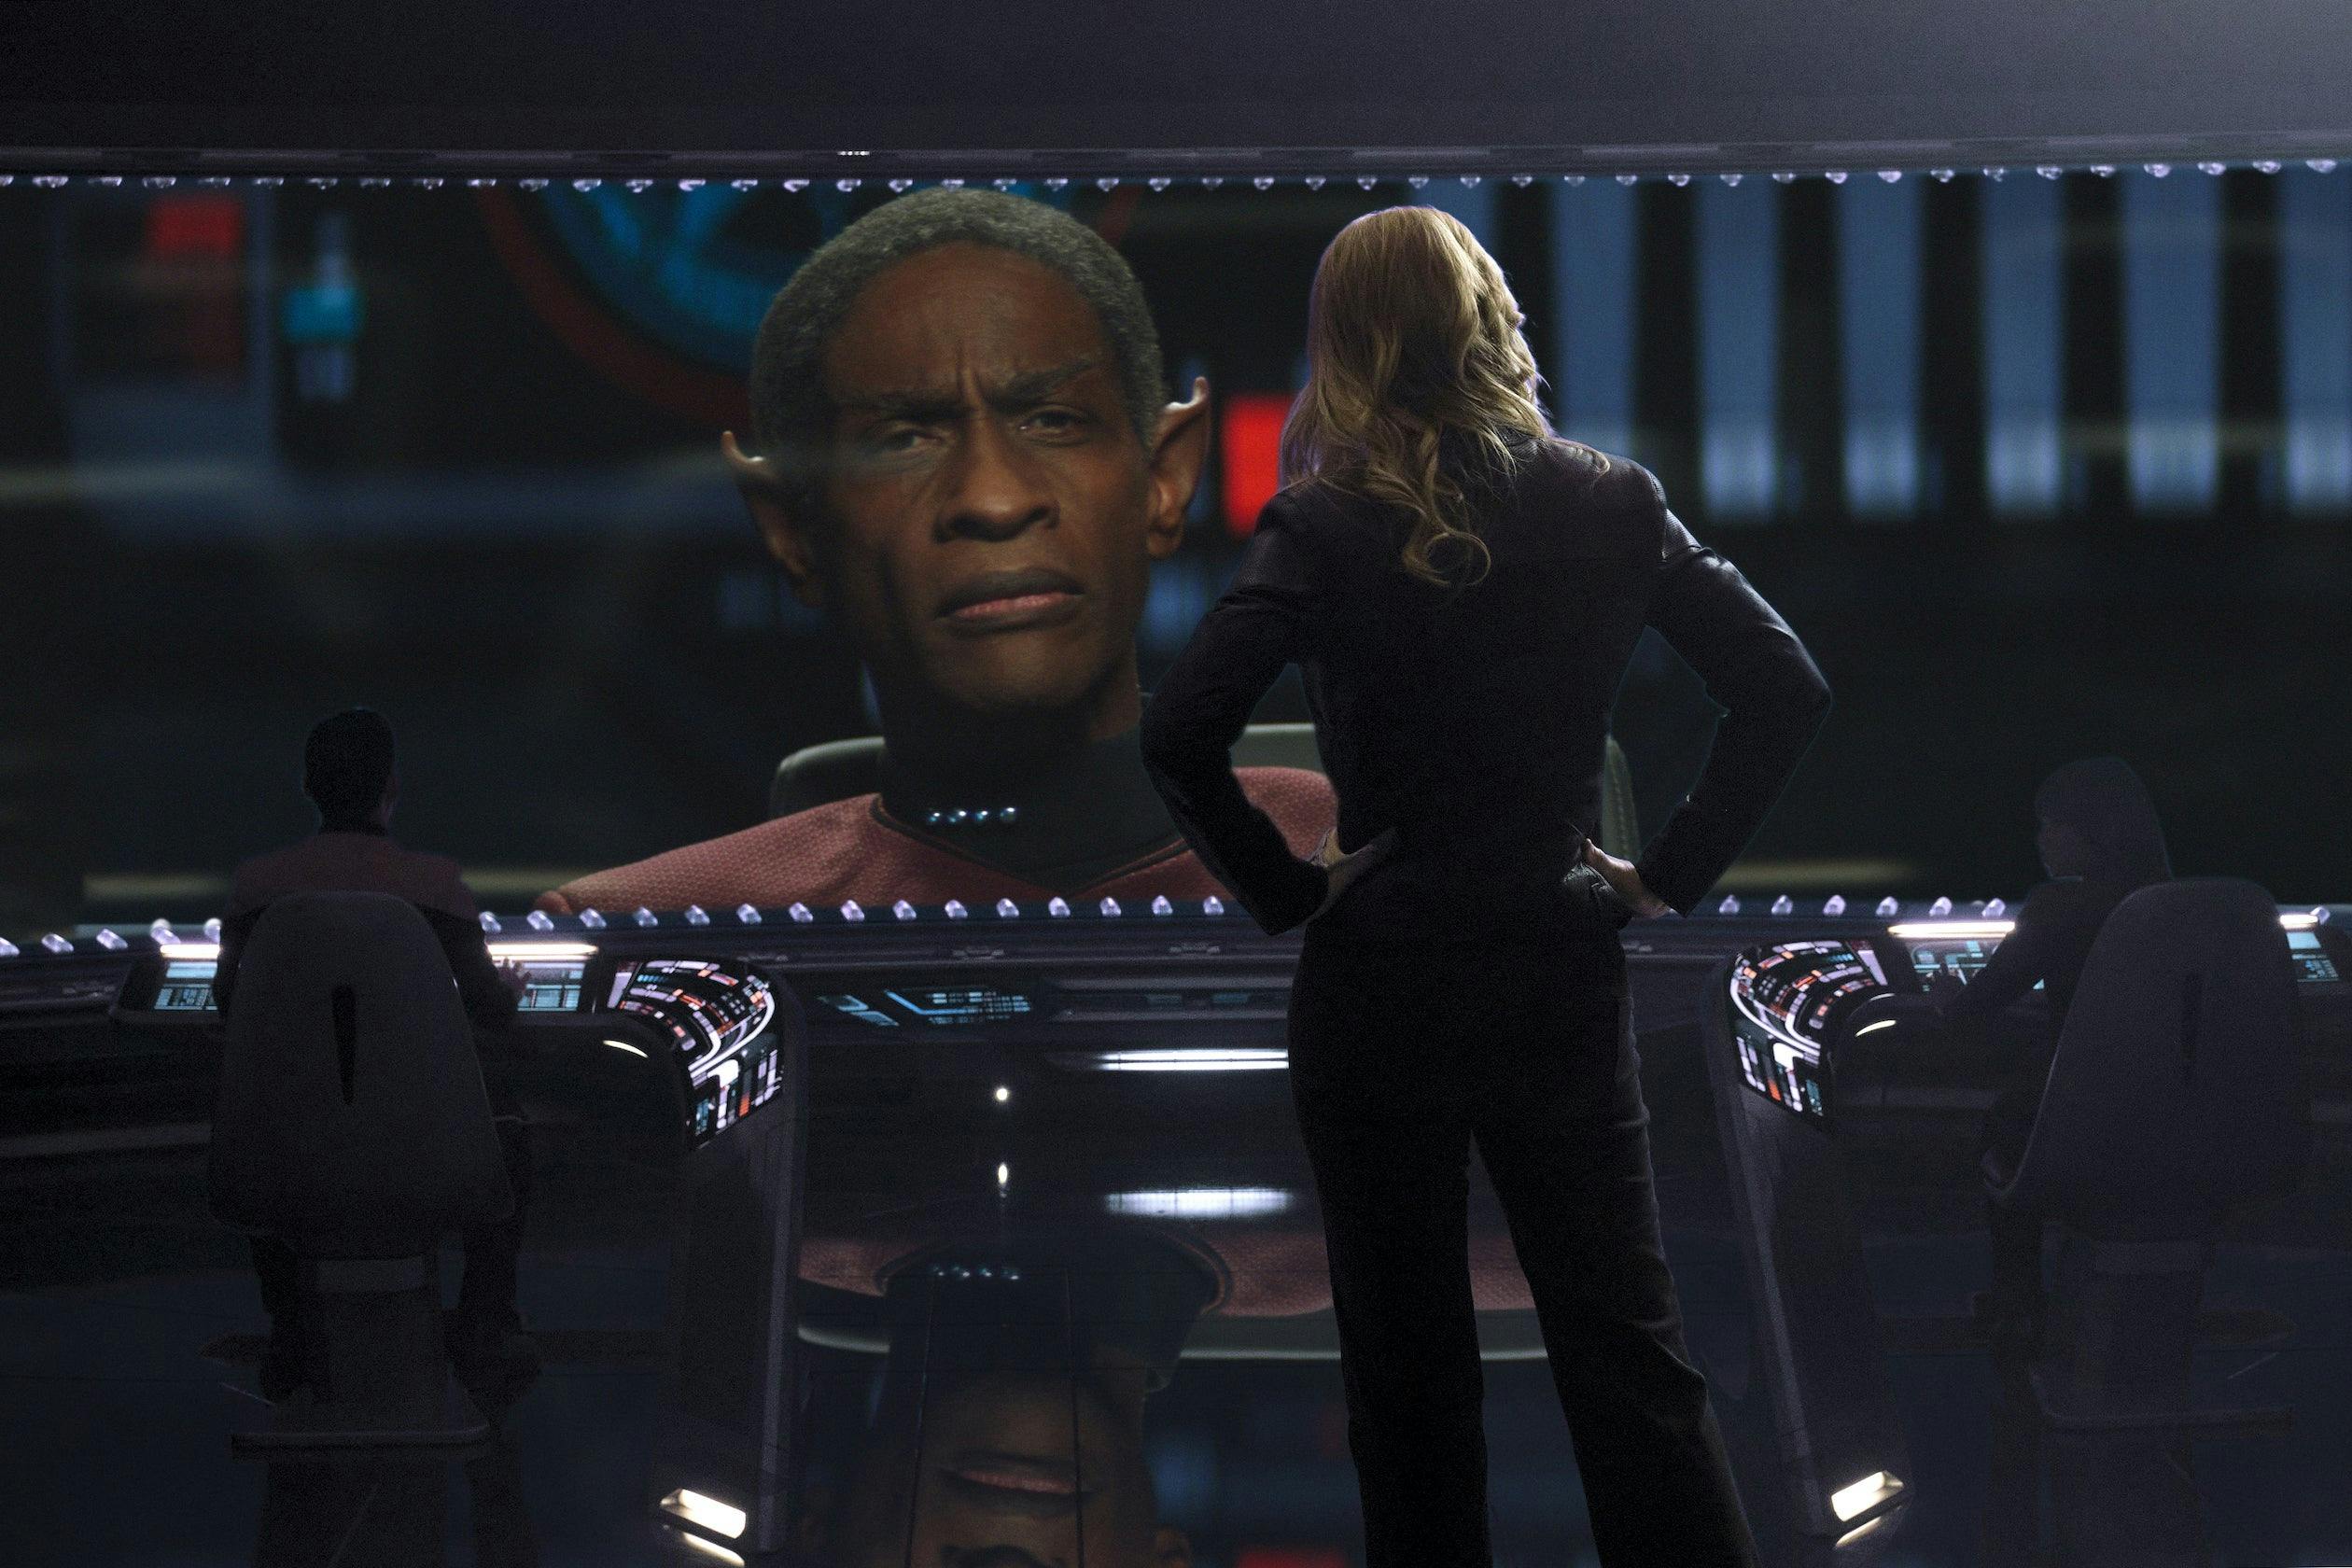 The imposter Tuvok faces Seven on the viewscreen of the Titan in 'Dominion'